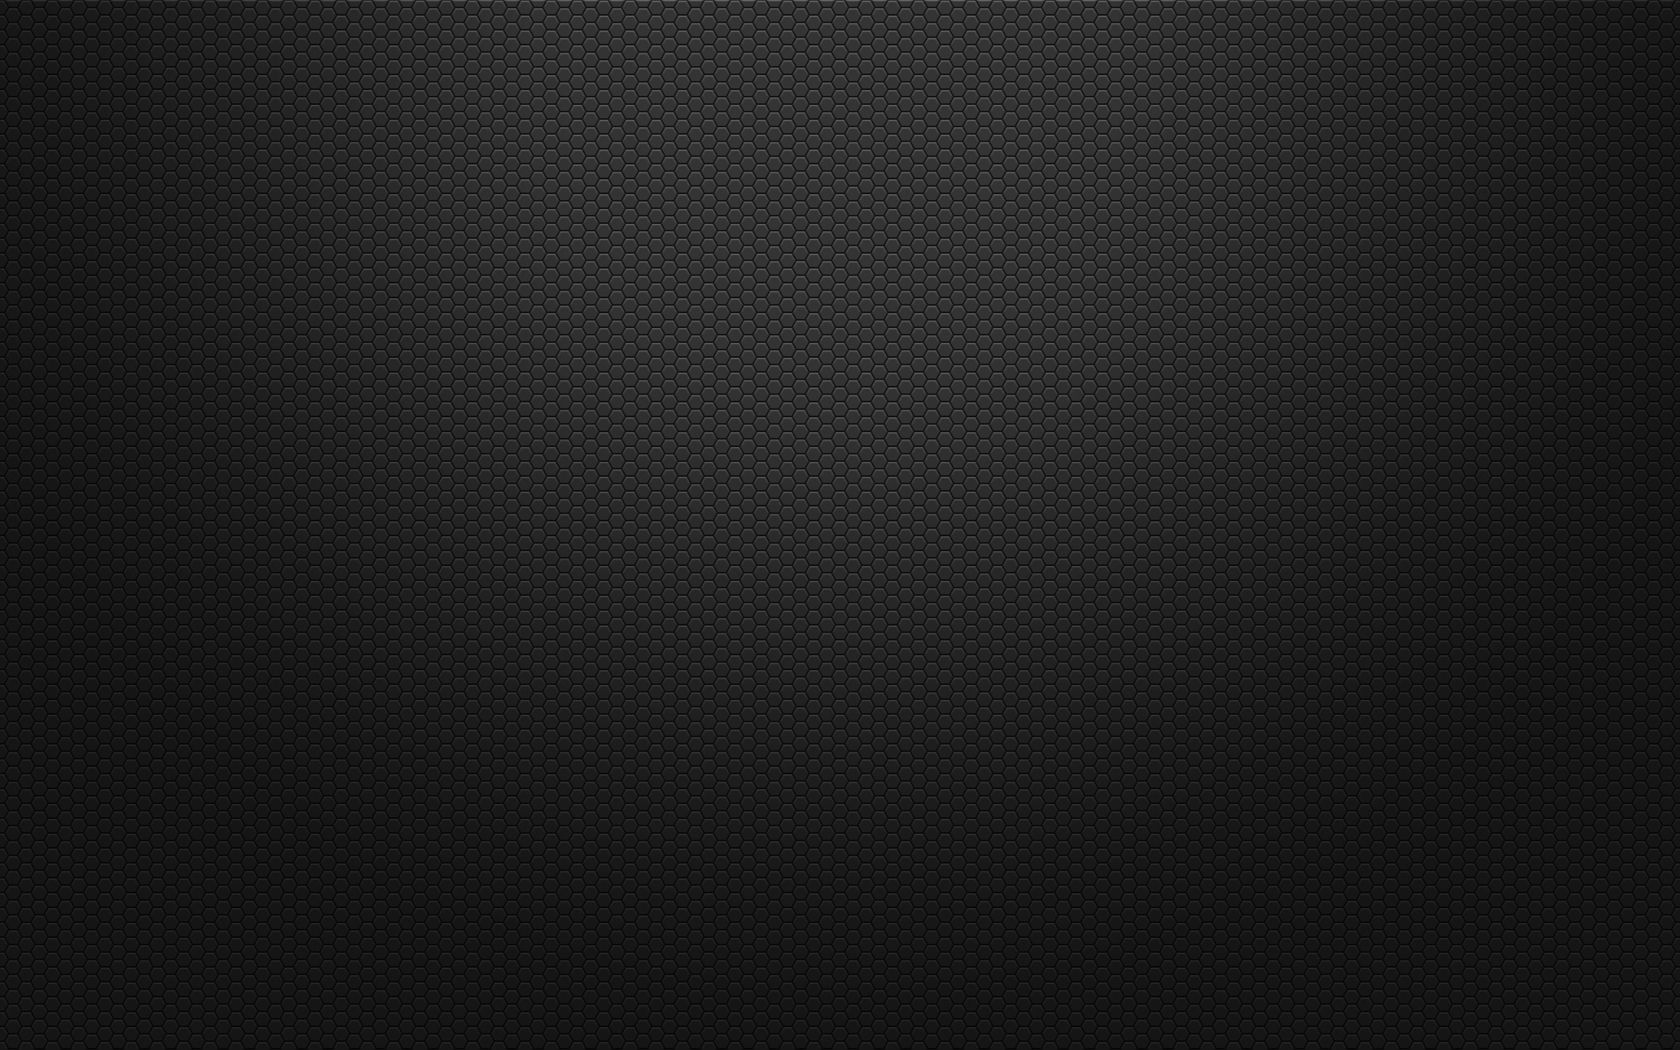 Plain Black Hd Wallpapers | The Art Mad Wallpapers